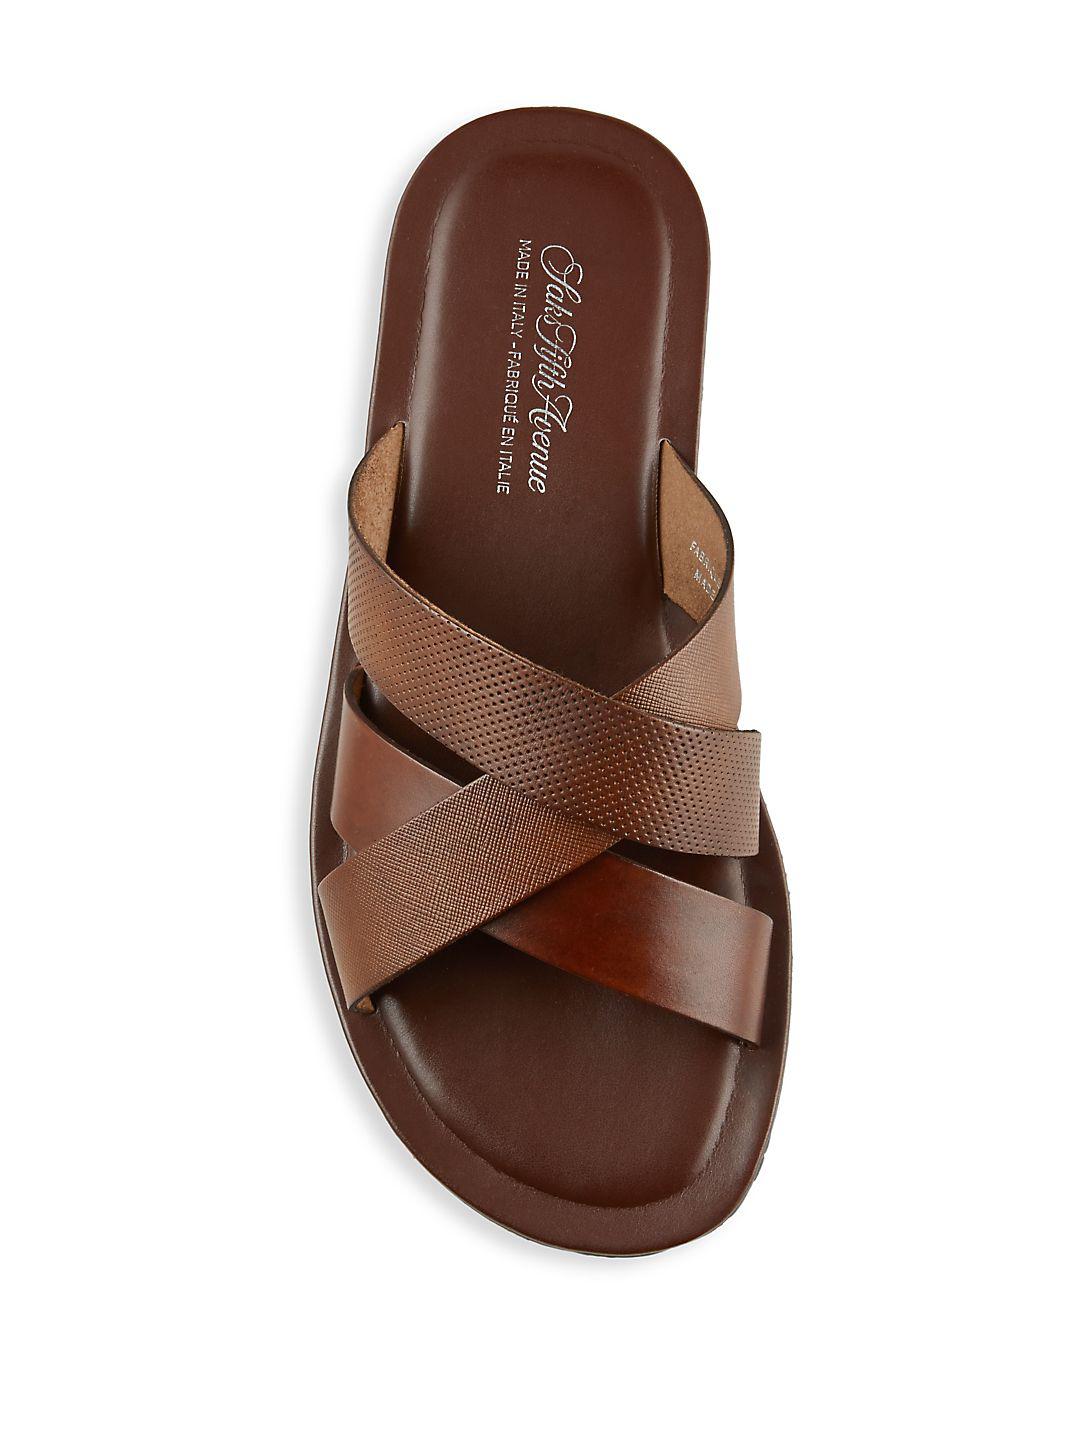 Saks Fifth Avenue Italian Leather Sandals in Brown for Men - Lyst